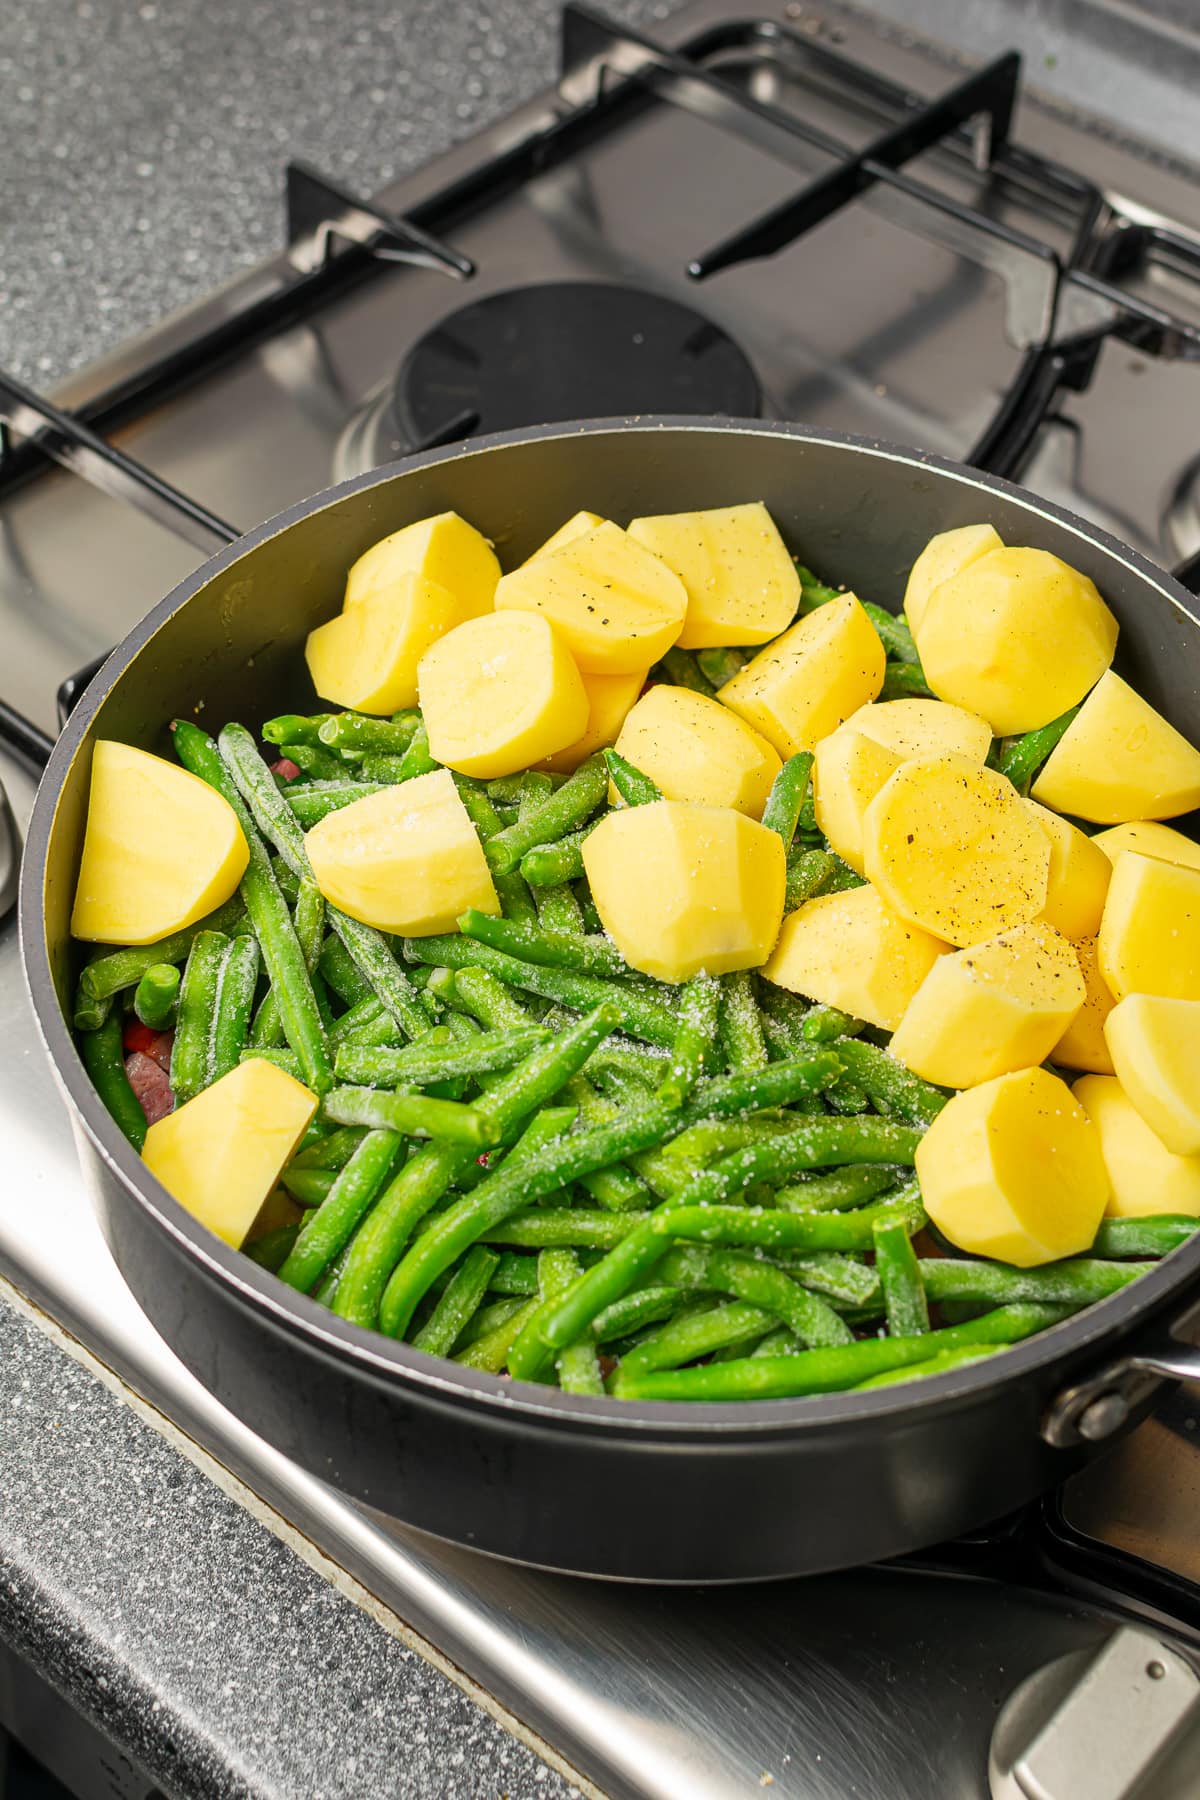 A skillet with sliced potatoes and green beans added to the sautéed kielbasa and onions.